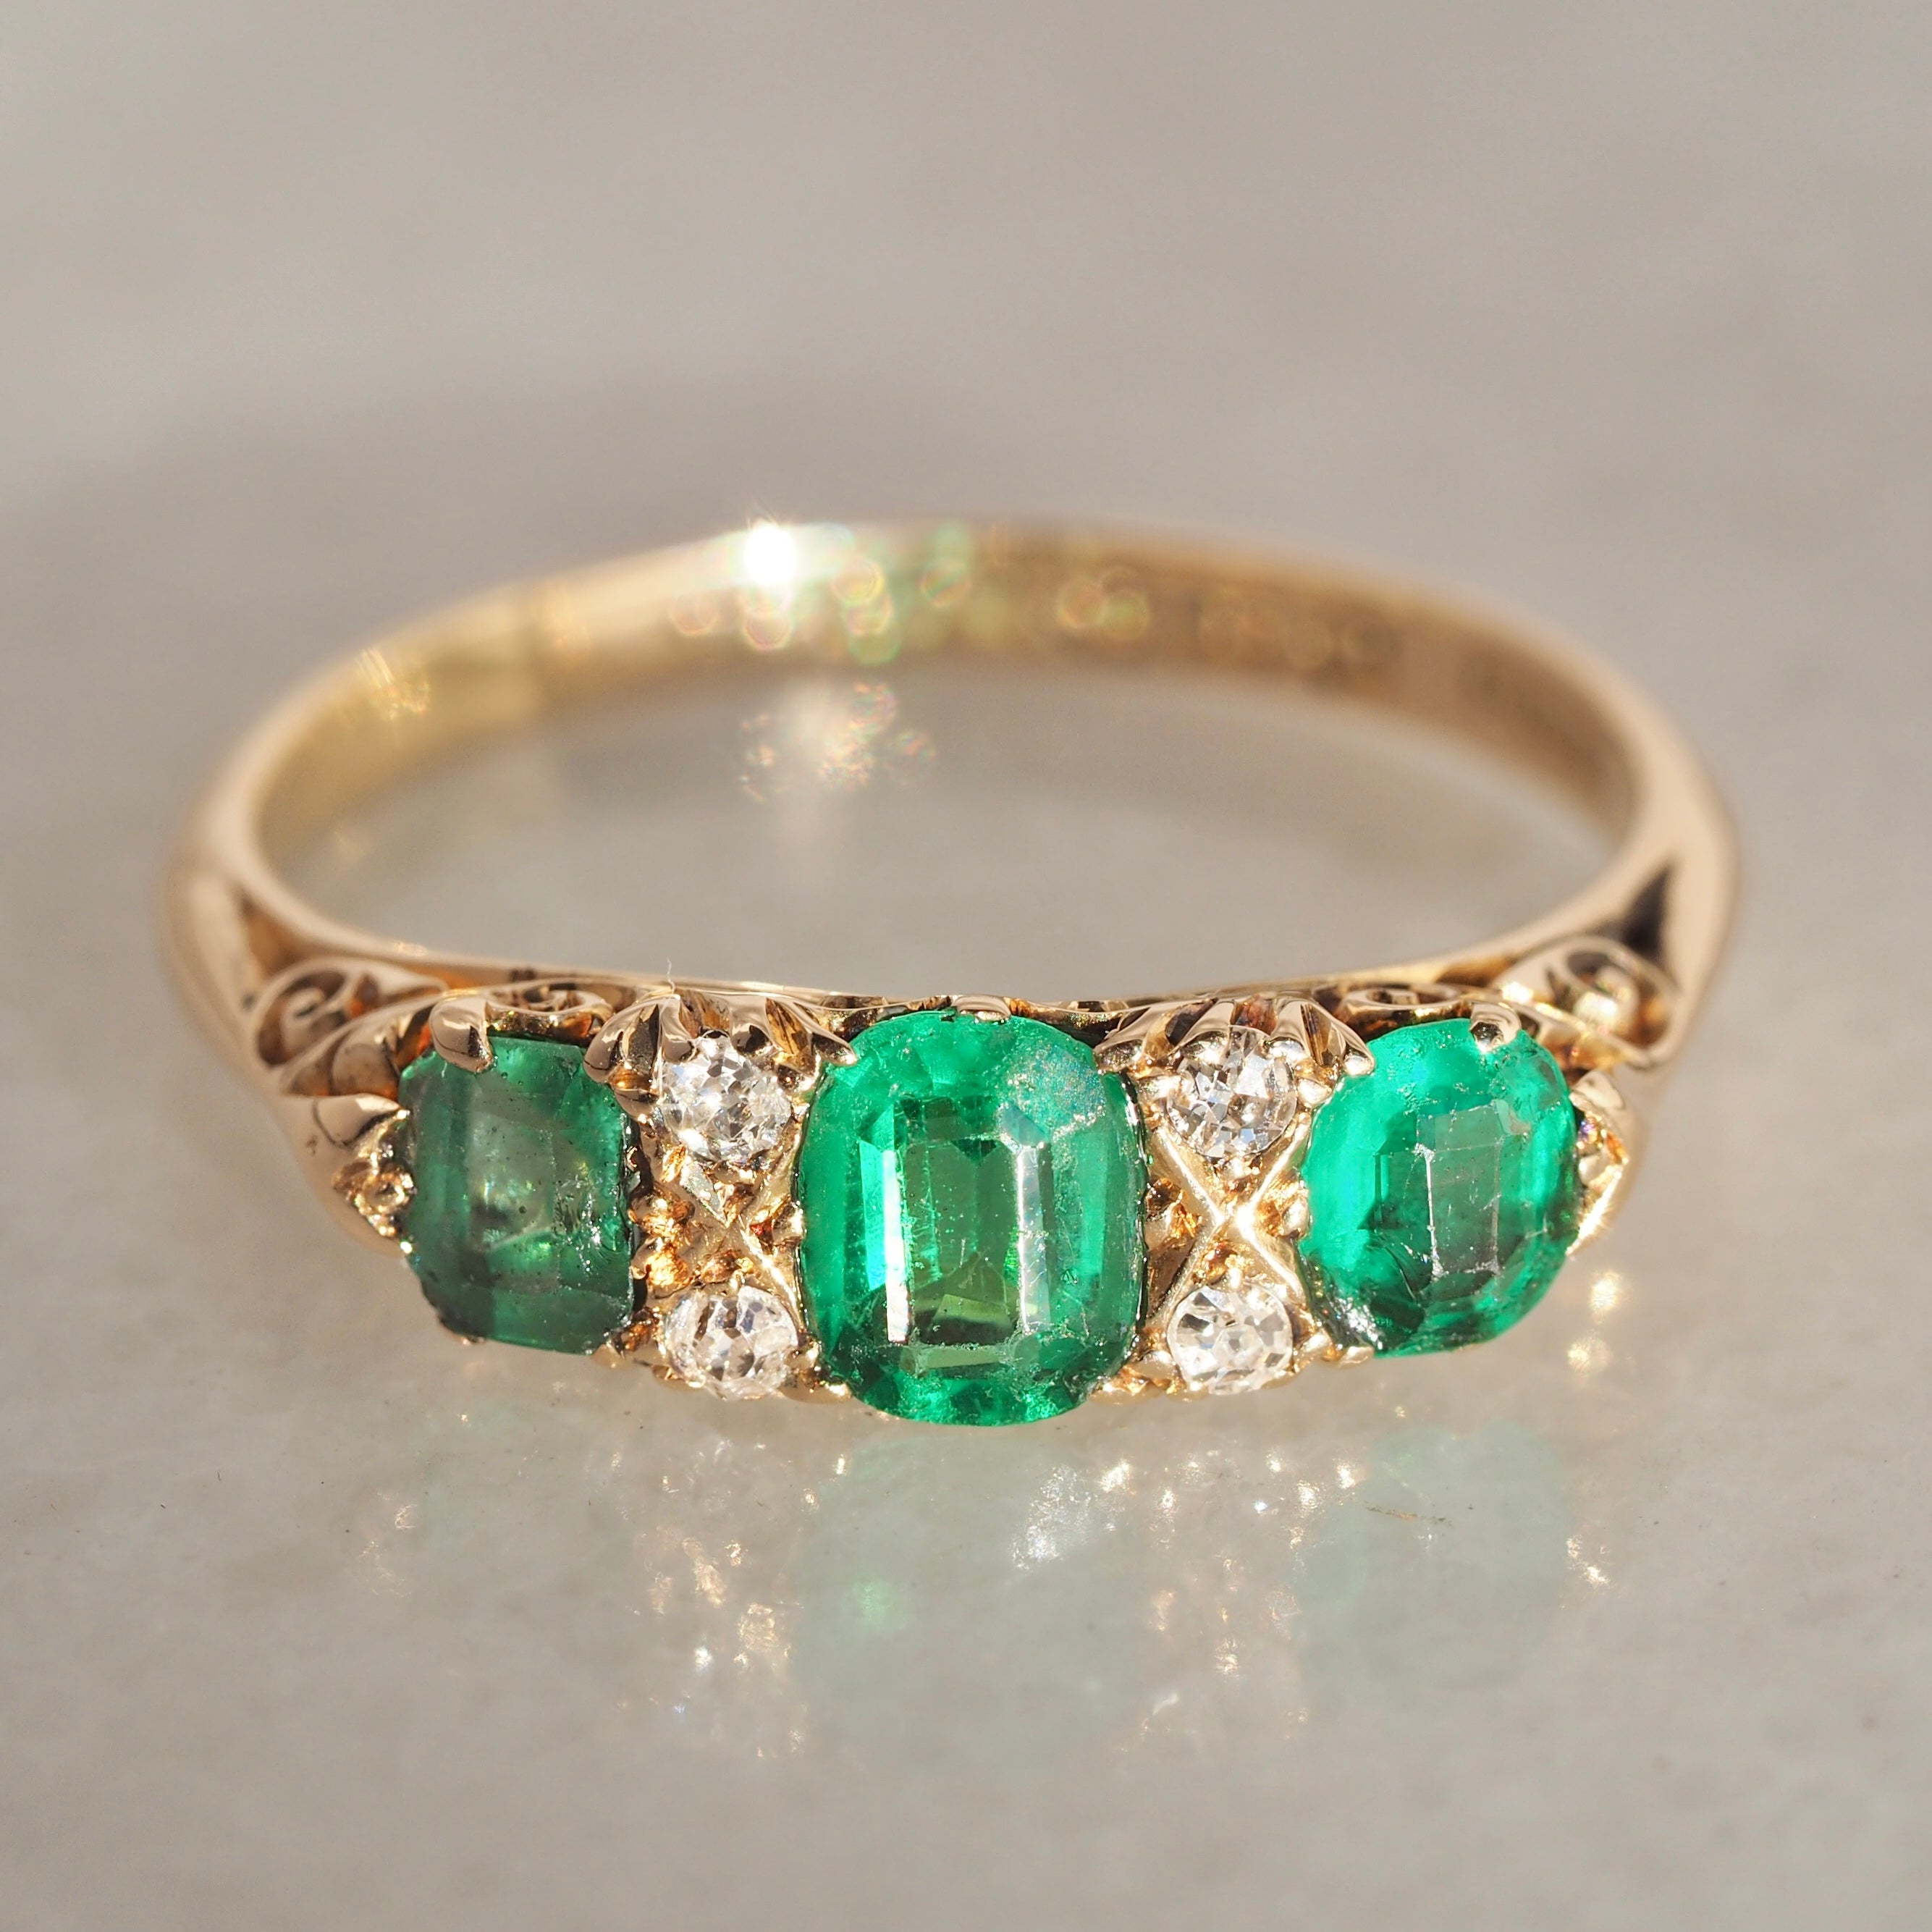 Antique Edwardian English 18k Gold Emerald and Old Mine Cut Ring